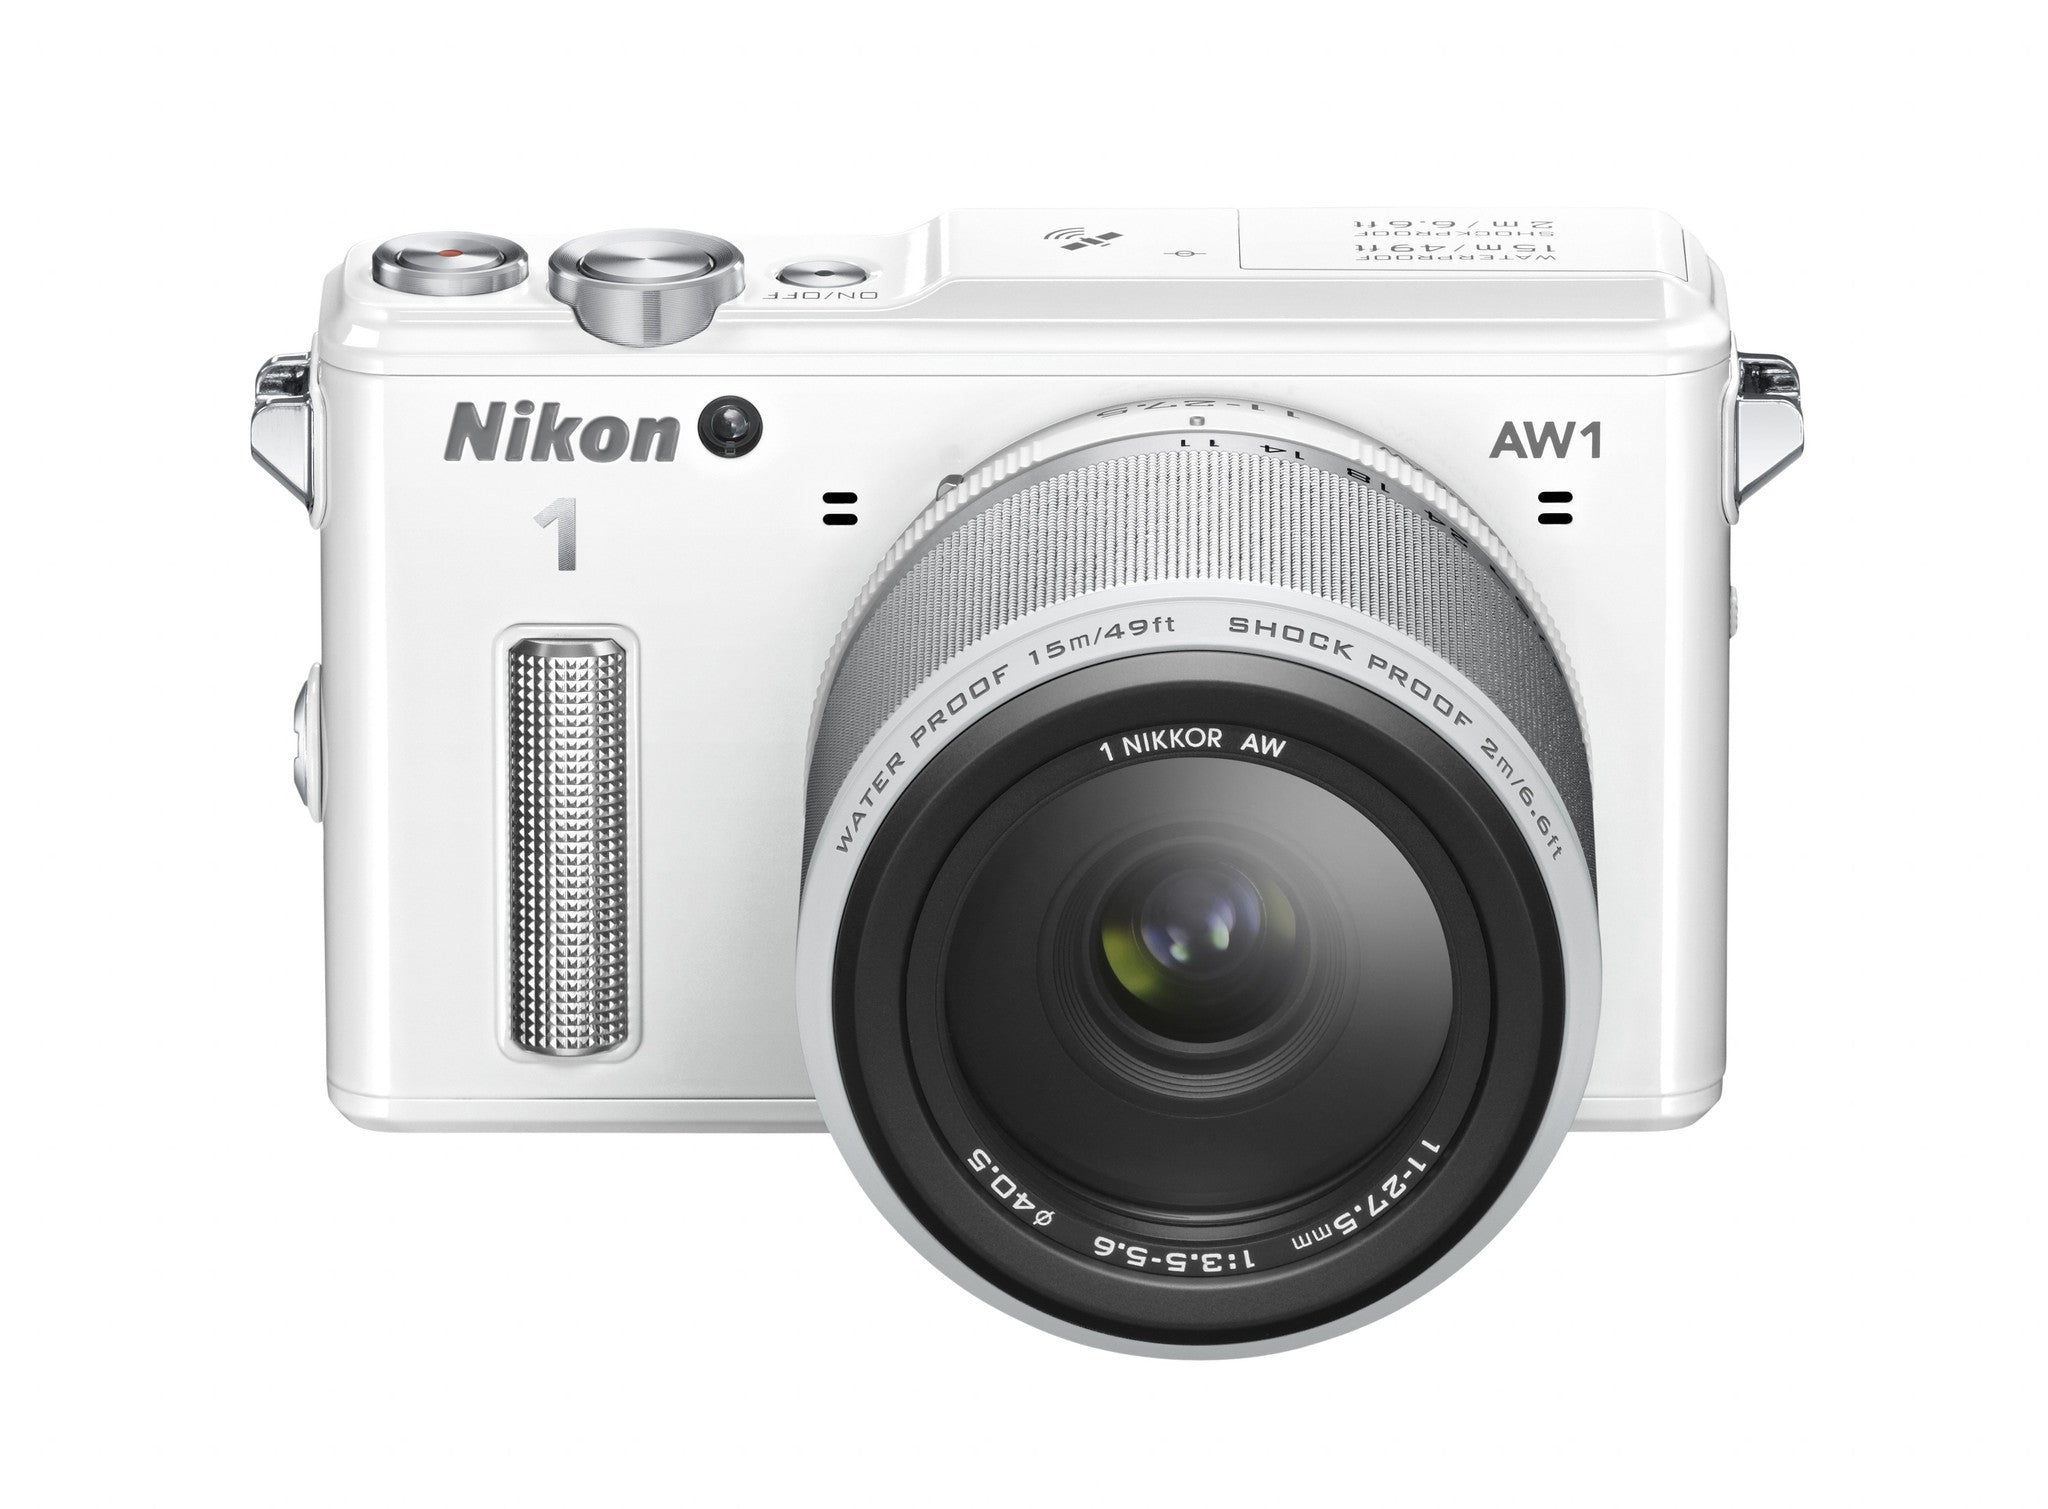 Nikon 1 AW1 Waterproof Digital Camera with AW 11-27.5mm Lens (White), discontinued, Nikon - Pictureline  - 6